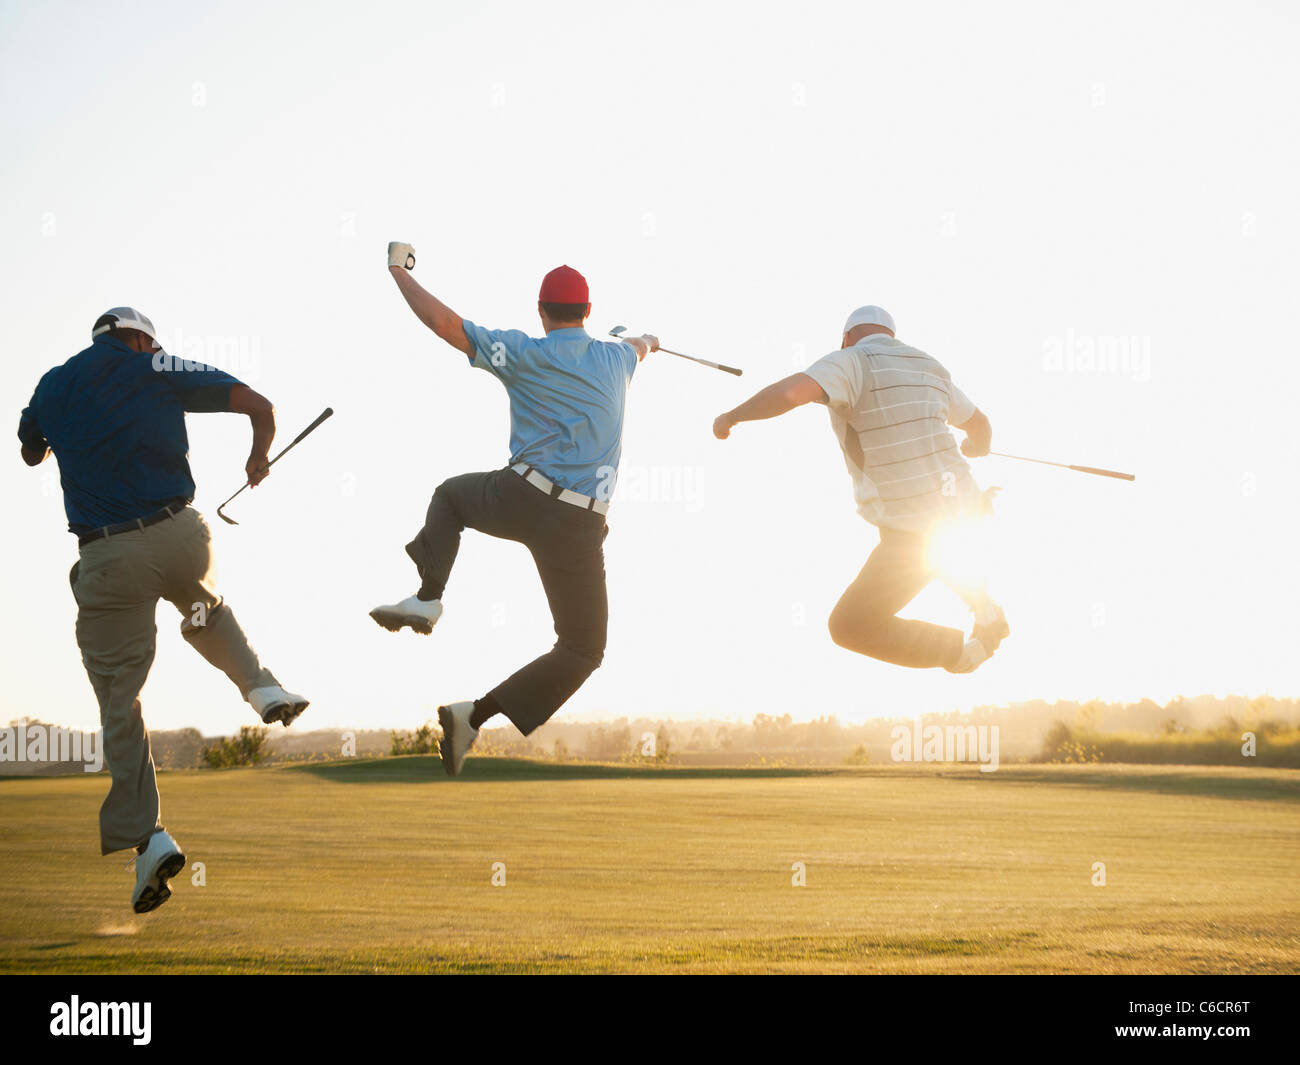 Excited golfers jumping in mid-air on golf course Stock Photo